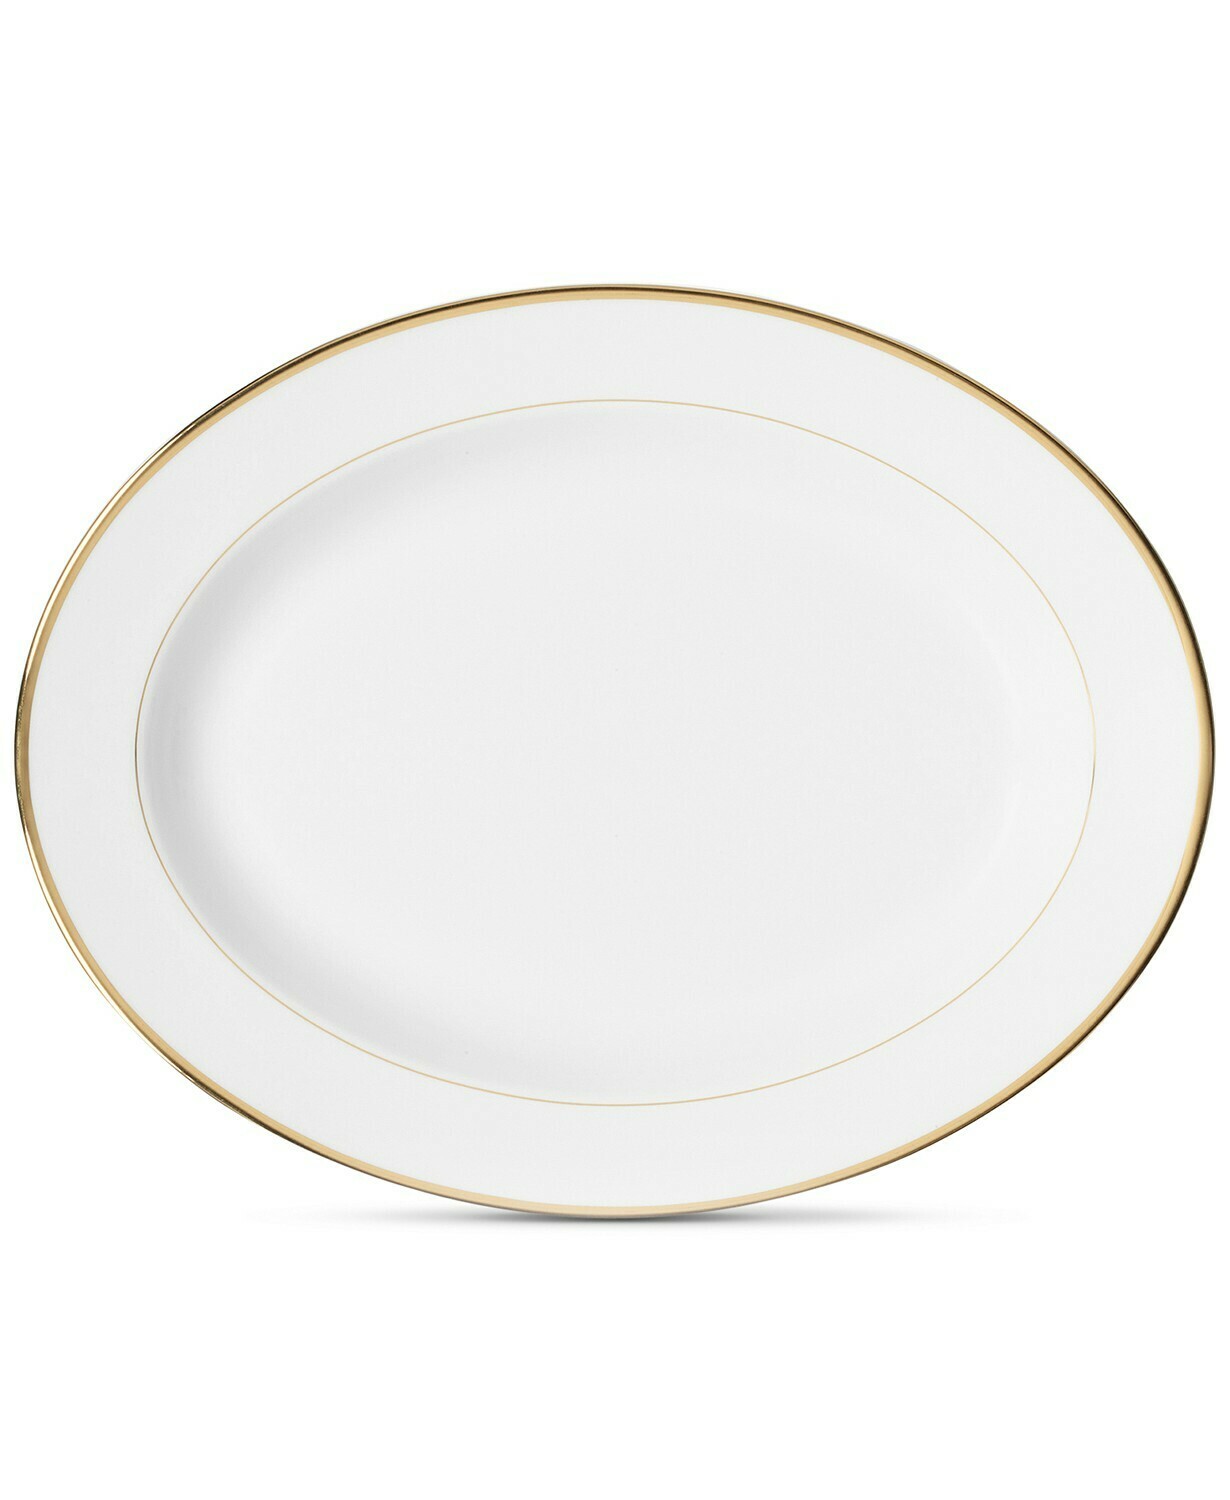 Mikasa Cameo Gold Oval Serving Platter, 14-Inch